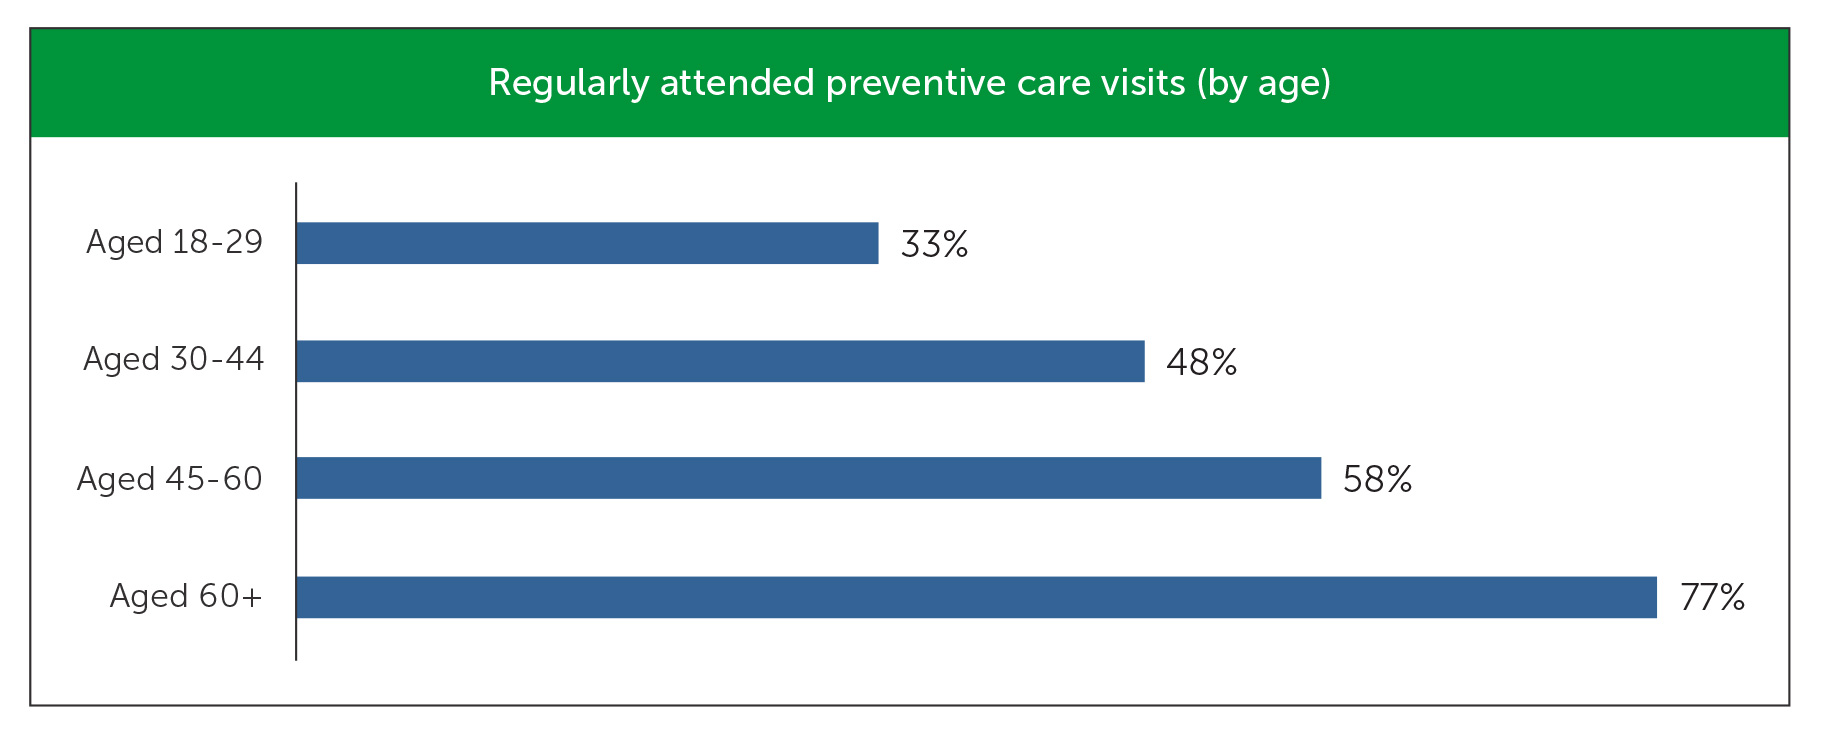 Regularly attended preventive care visits by age